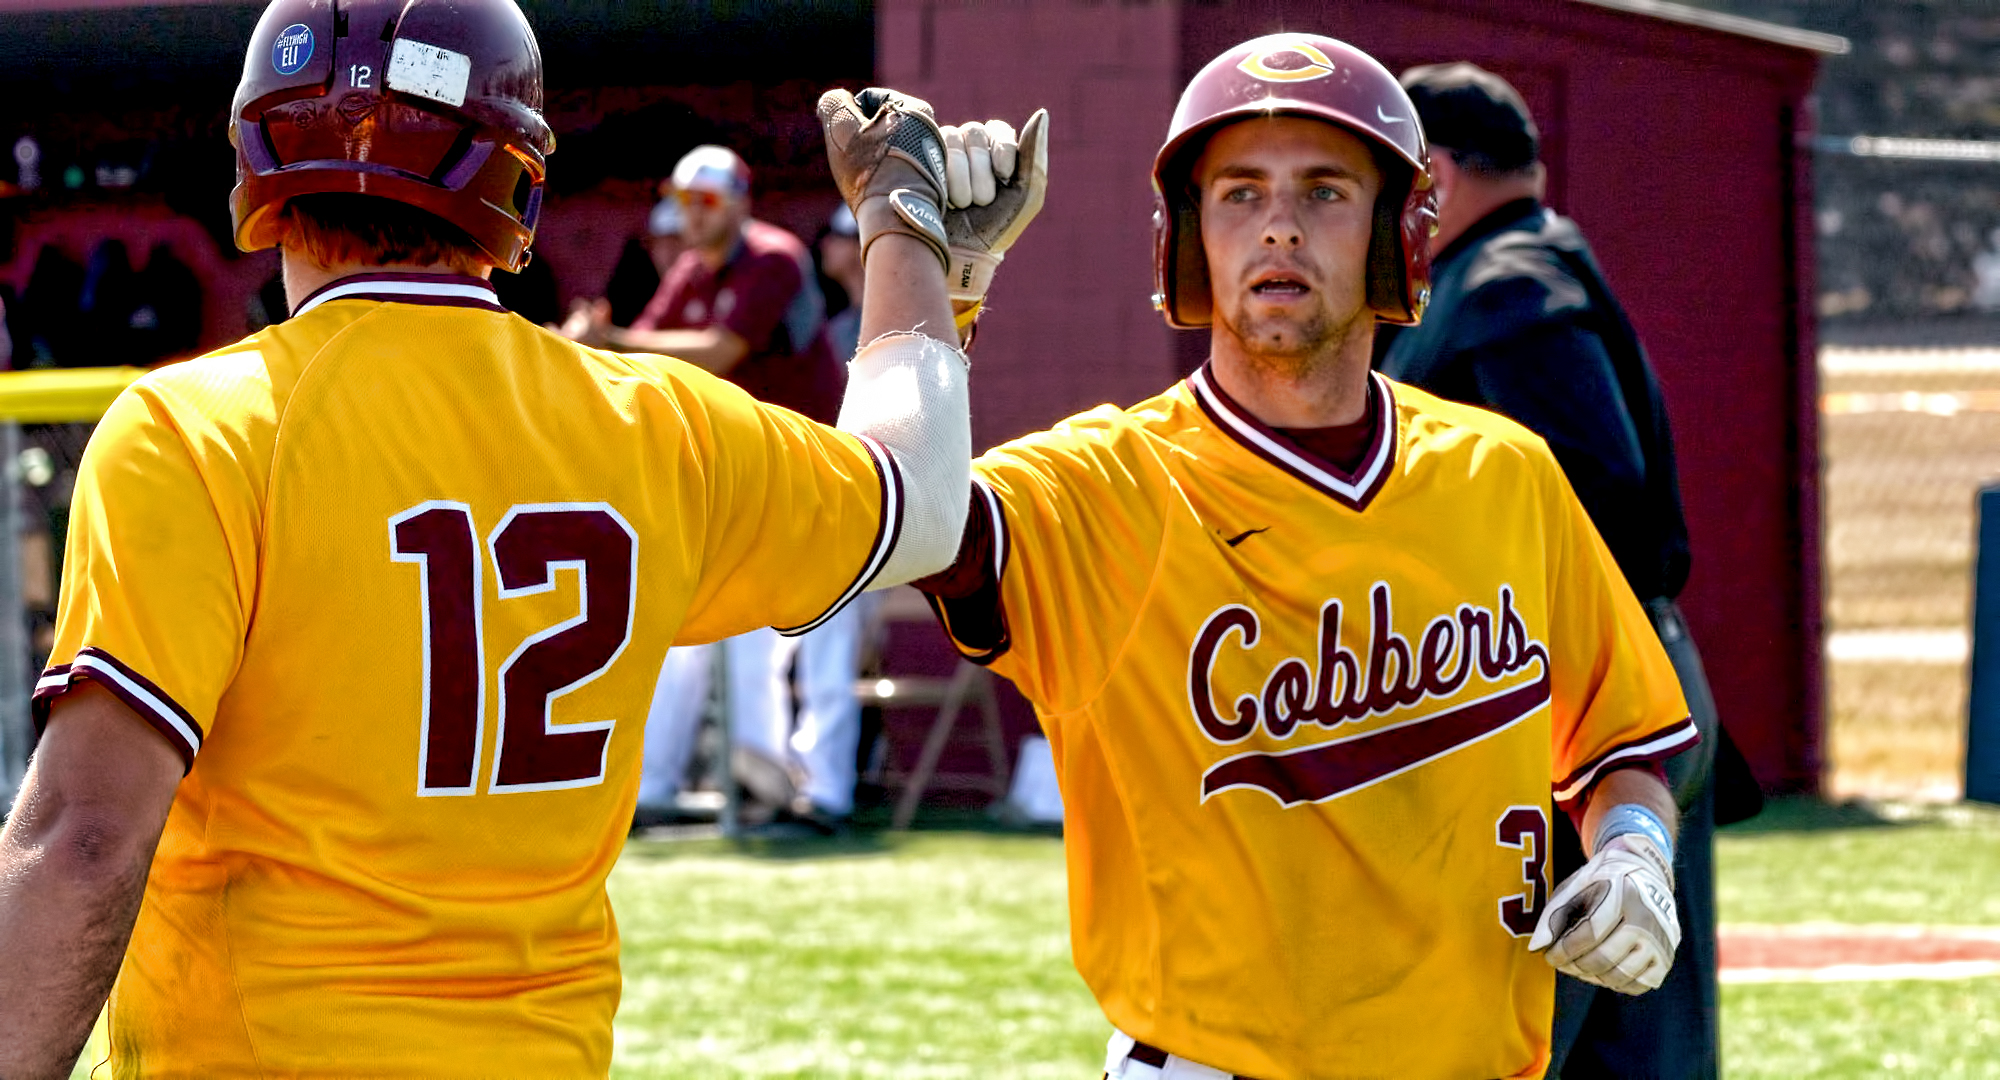 Junior Nate Hoeft is congratulated after scoring one of the game-tying runs in the seventh inning in Game 2 of the Cobbers' sweep over Augsburg.